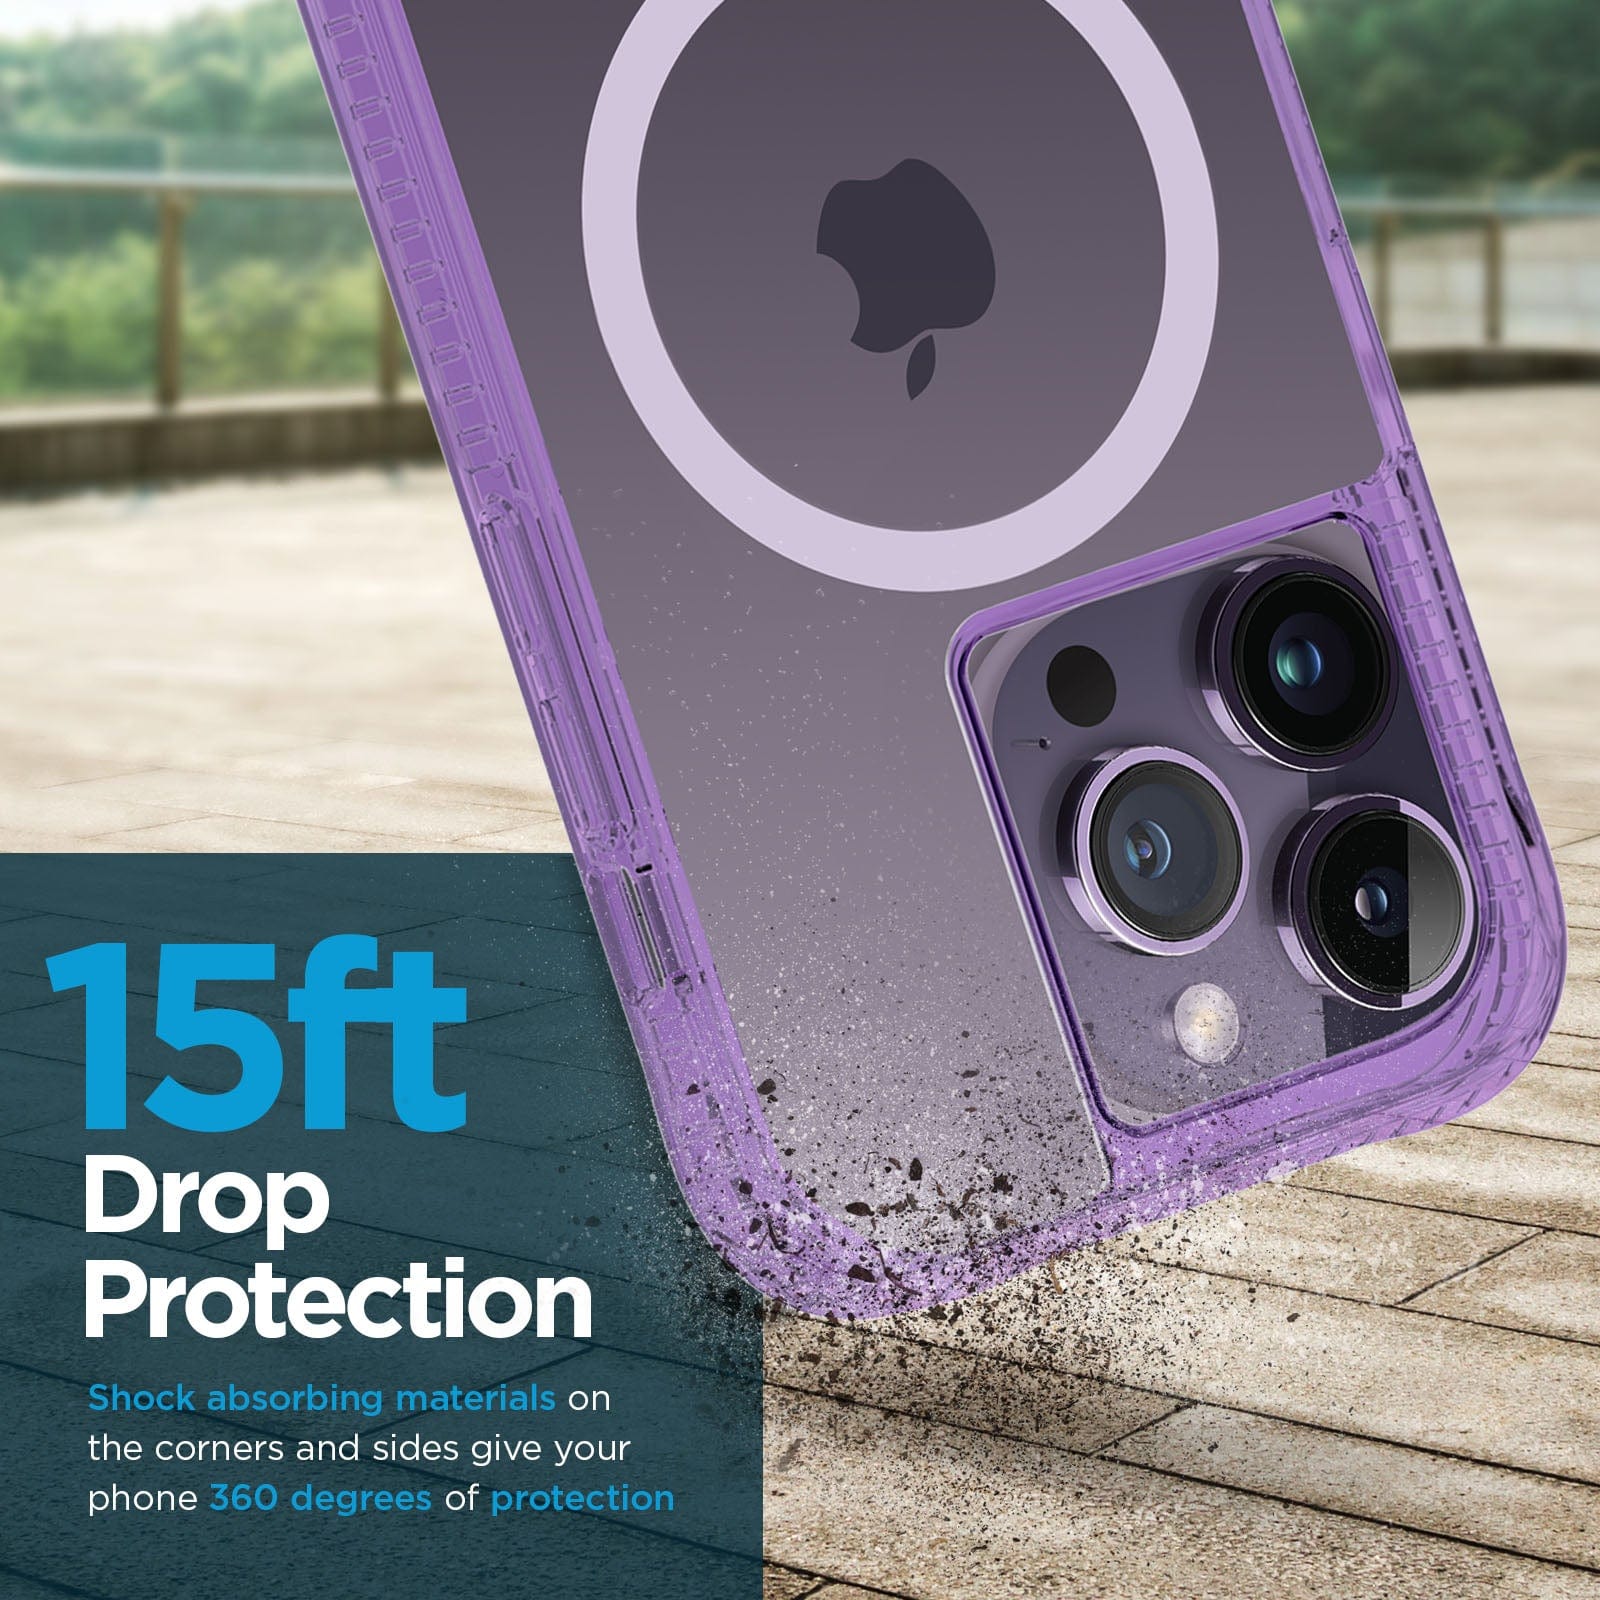 15ft Drop Protection. Shock absorbing materials on the corners and sides give your phone 360 degrees of protection. 